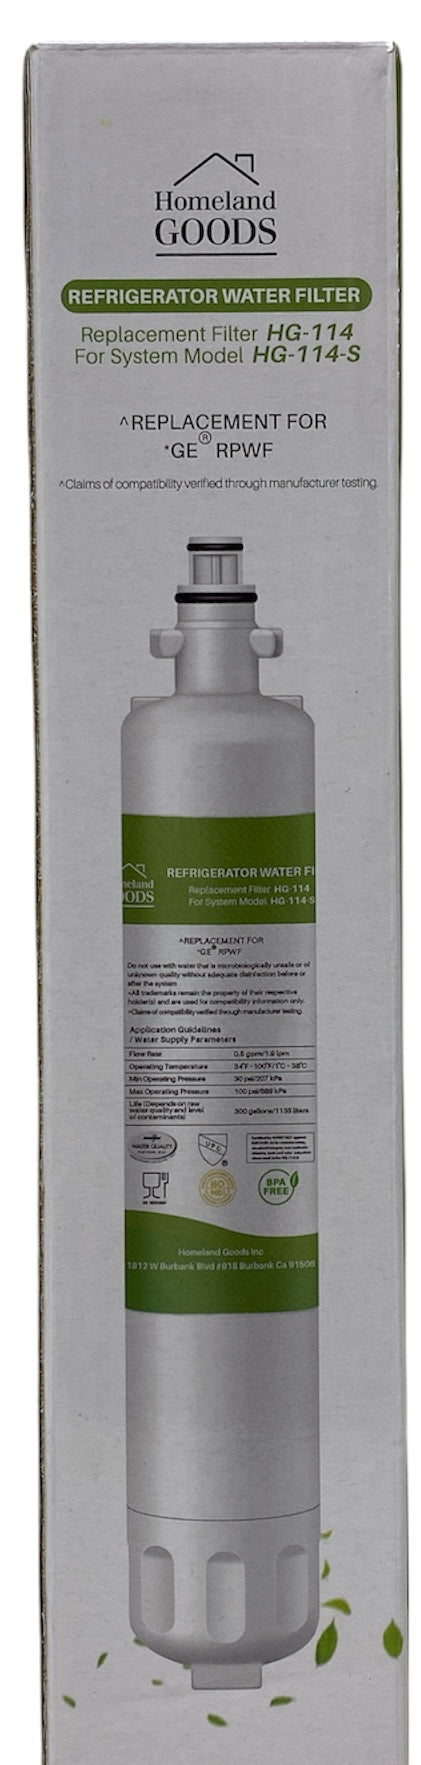 RWF3600A Refrigerator Water Filter IAPMO Certified Replacement for GE RPWF (NOT RPWFE), RWF1063, RWF3600A, WSG-4, DWF-36, R-3600, MPF15350, OPFG3-RF300, BCF77 Refrigerator Water Filter